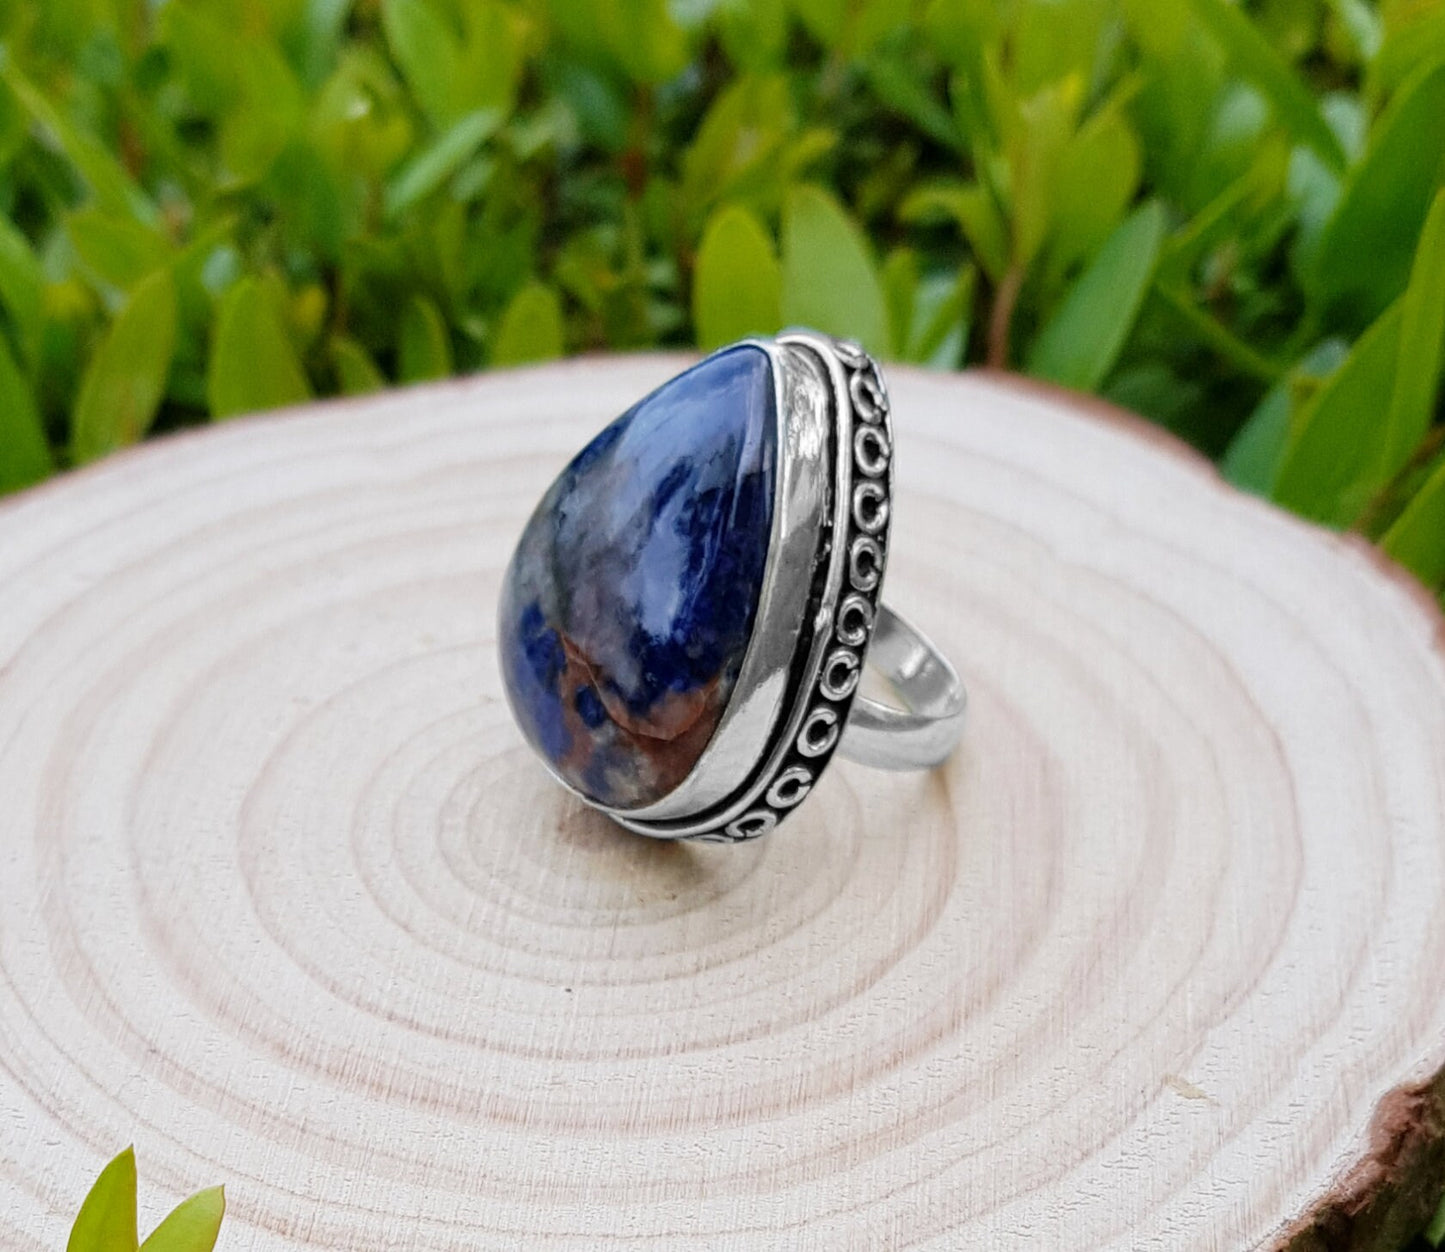 Sodalite Statement Ring In Sterling Silver Size US 7 1/2 Gemstone Ring Boho Ring Unique Jewelry Ethnic Ring GypsyJewelry